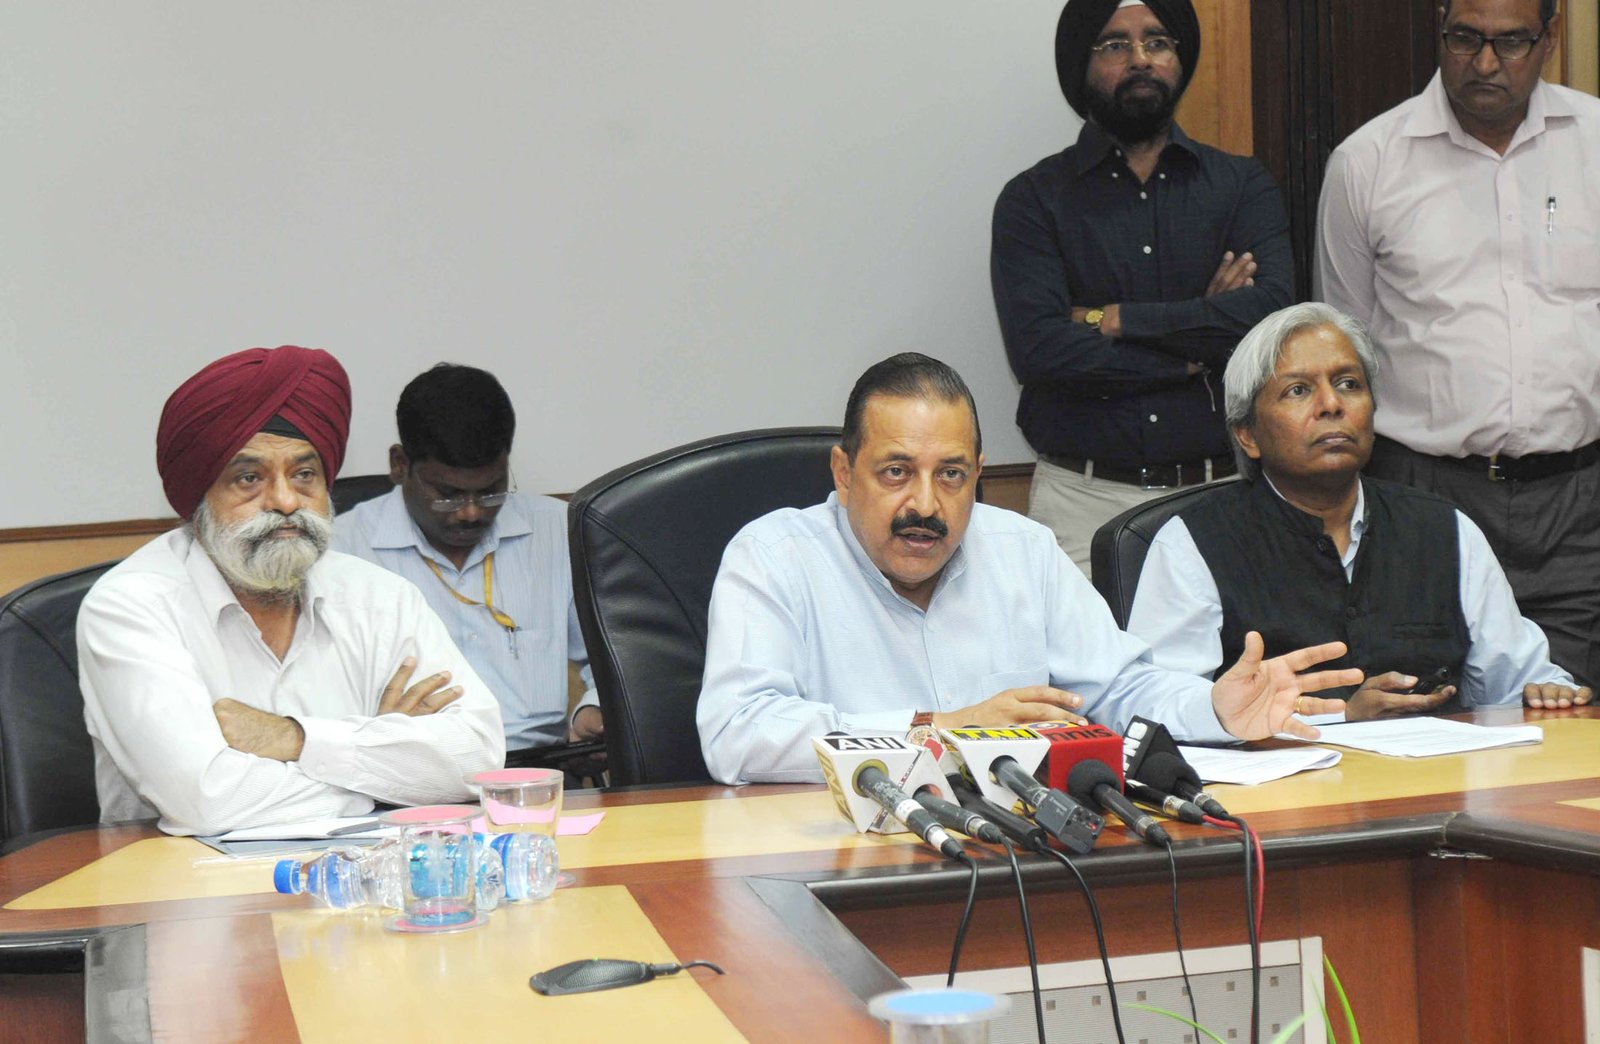 Dr Jitendra Singh addressing the media to announce a new program of the Ministry, 'Maithreyi International Visiting Professorship', in New Delhi on October 11, 2014. Secretary, Departments of Biotechnology, Science & Technology and Scientific & Indust